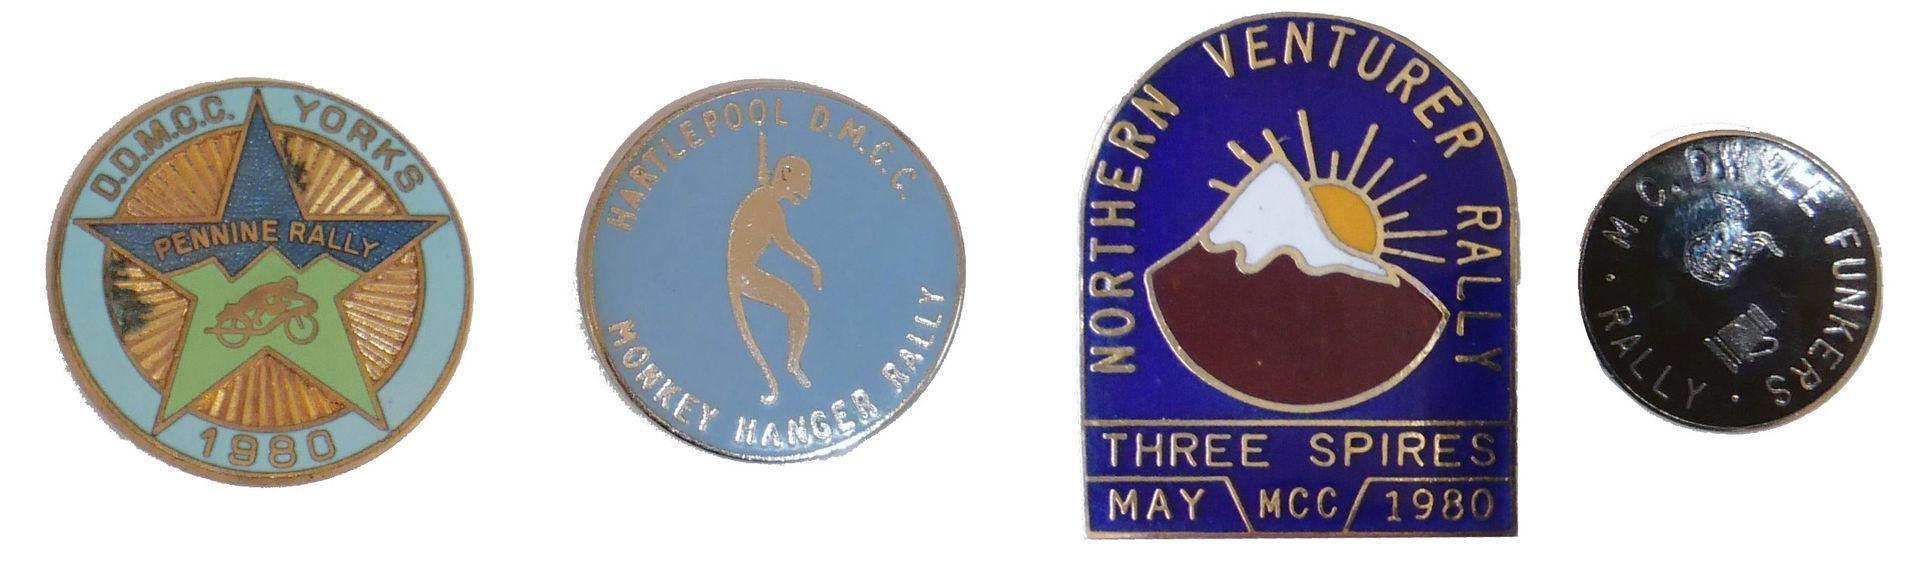 My badges for Pennine, Monkey Hangers, Northern Venturer and Dwyle Funkers1980